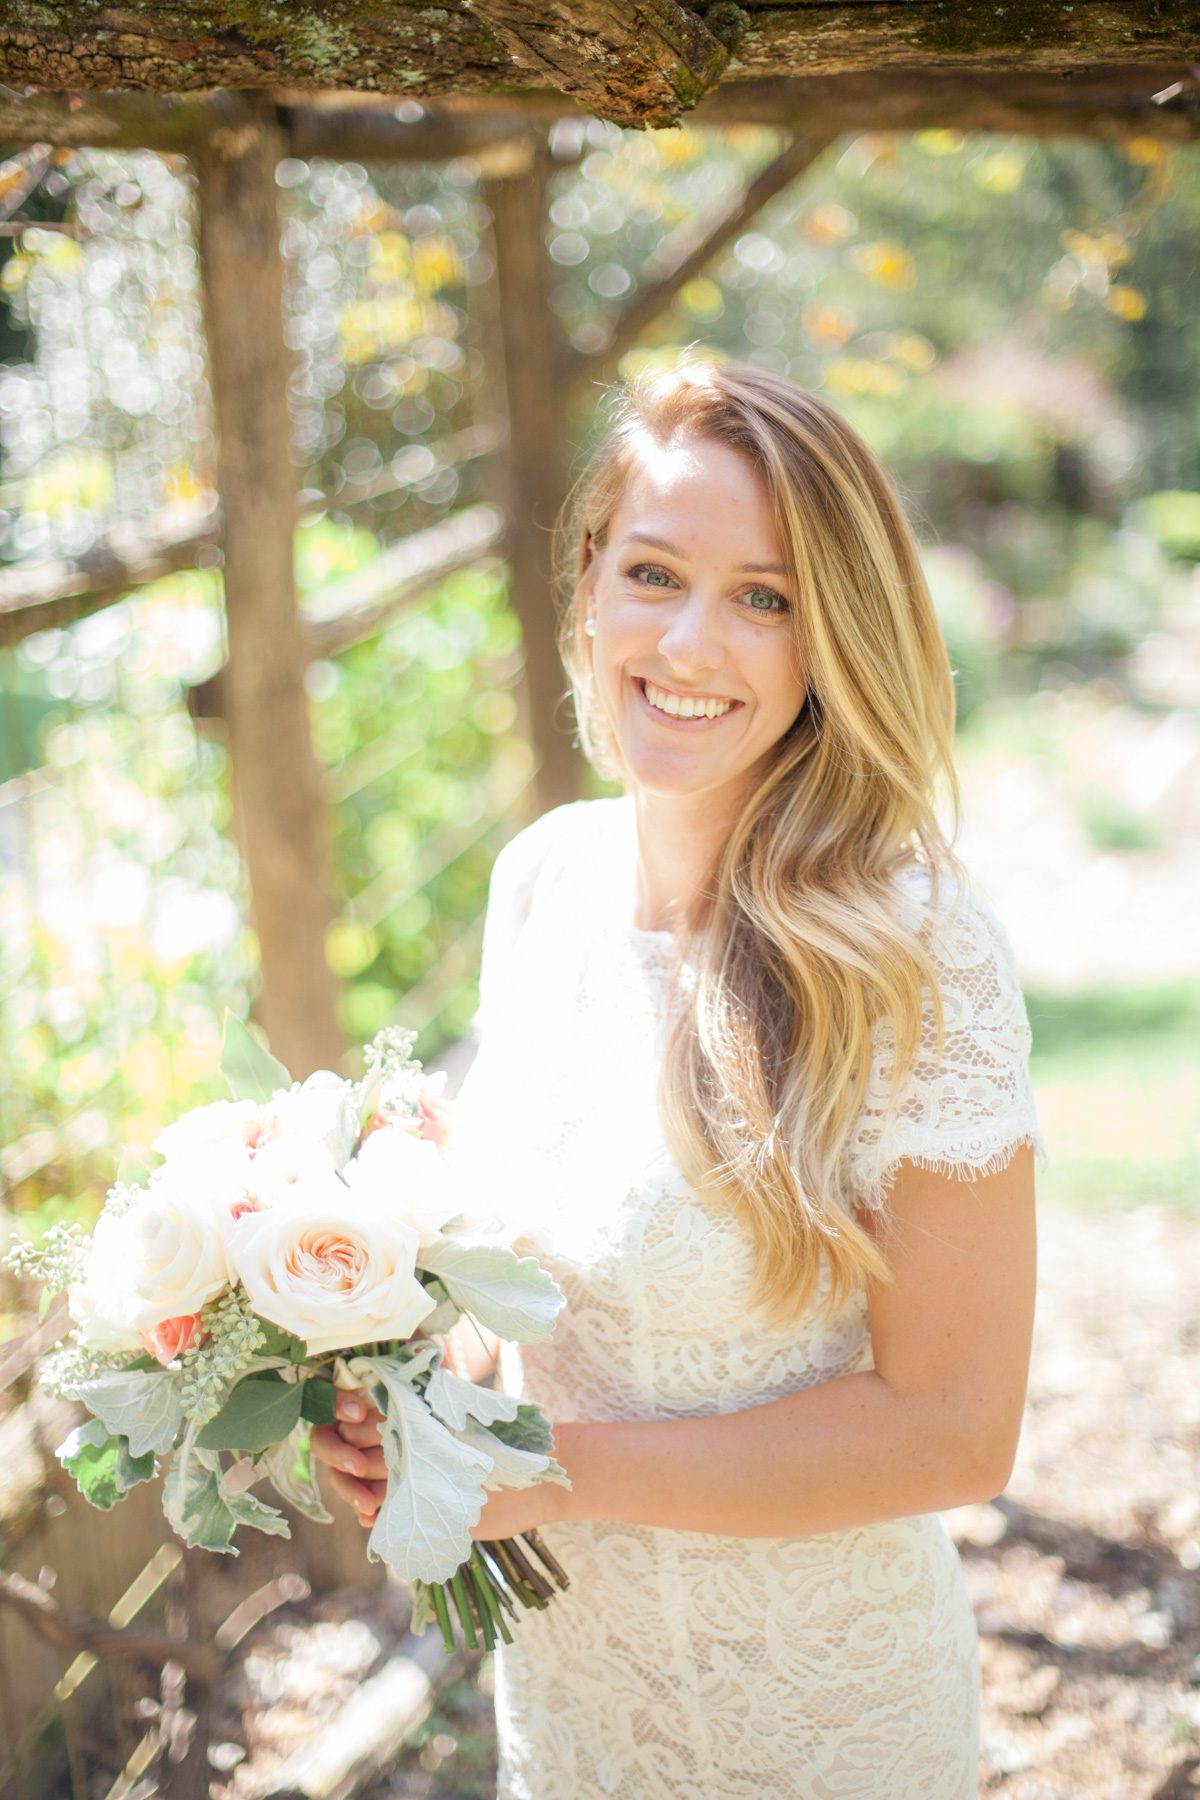 Bride at Butterfly Hollow wedding in Gordonsville, TN / Photography by Krista Lee